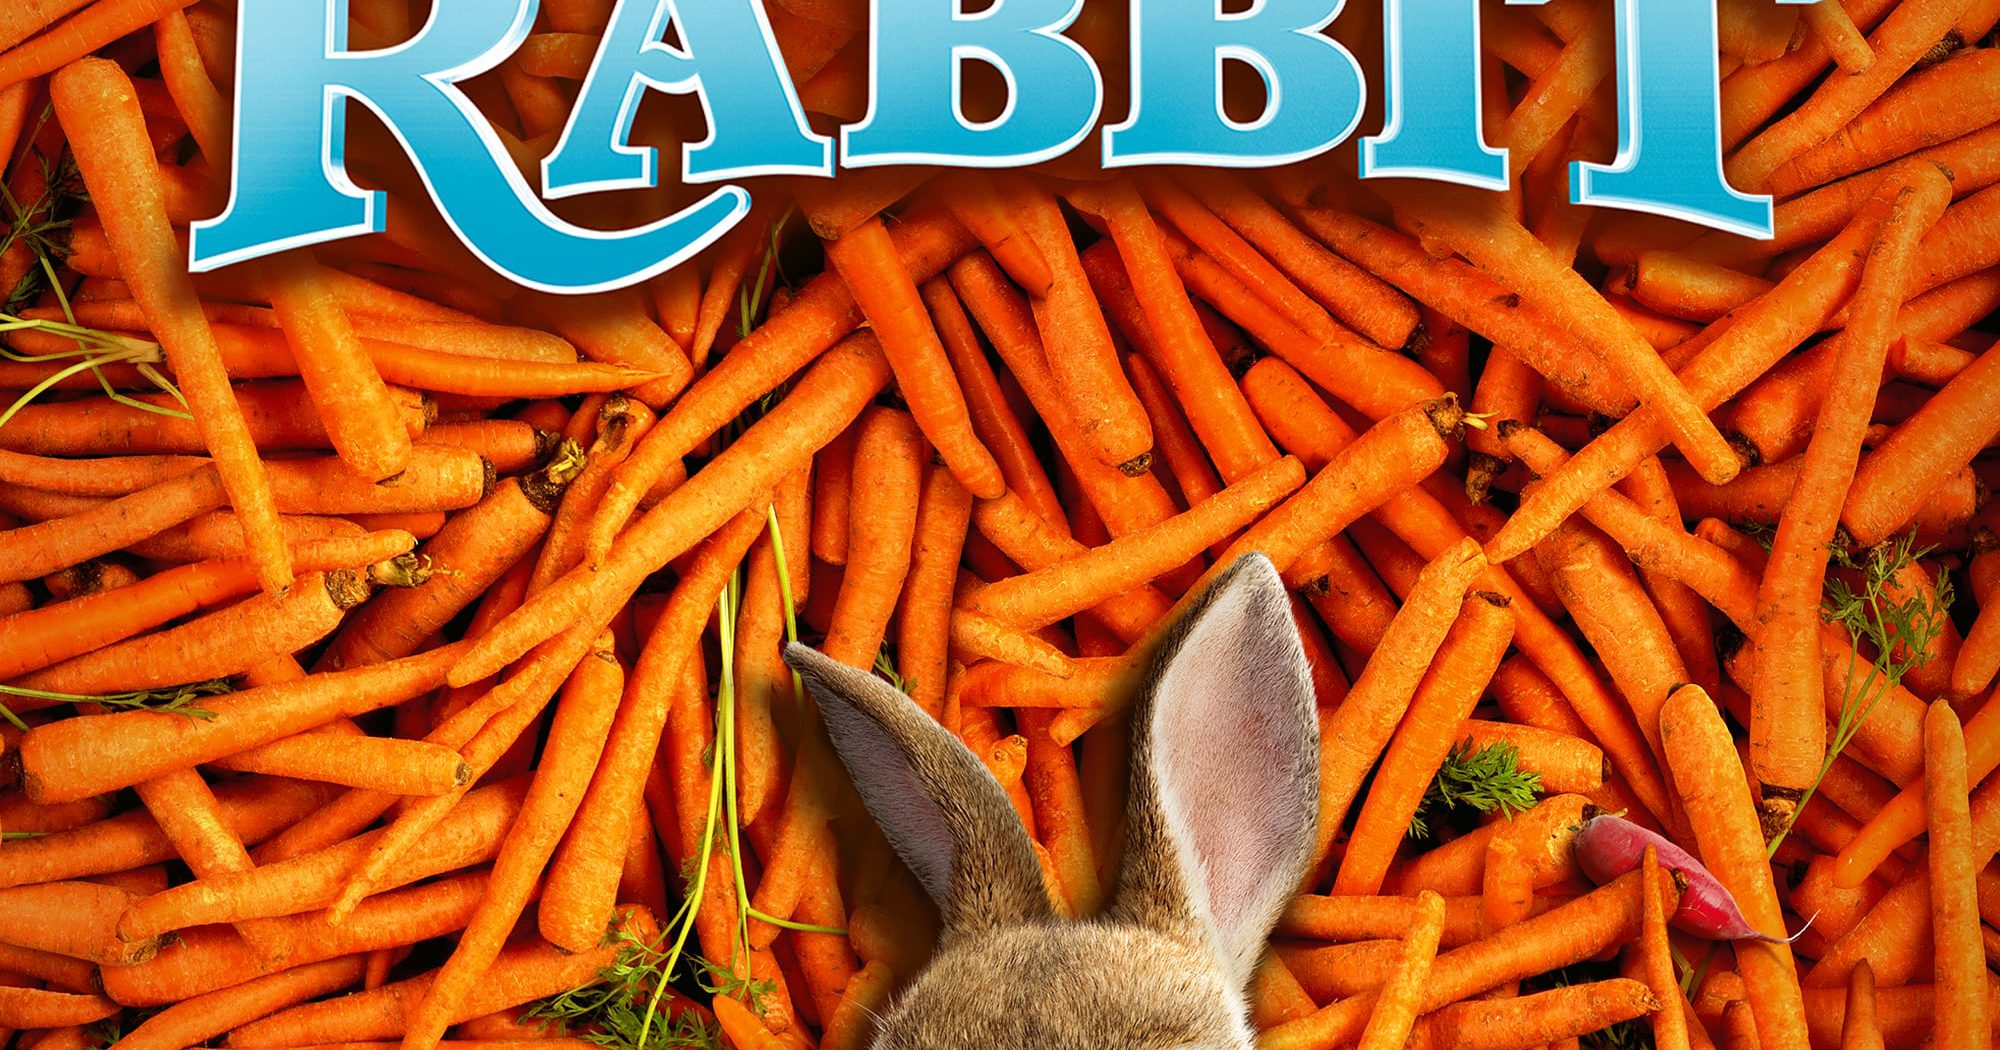 Poster for the movie "Peter Rabbit"